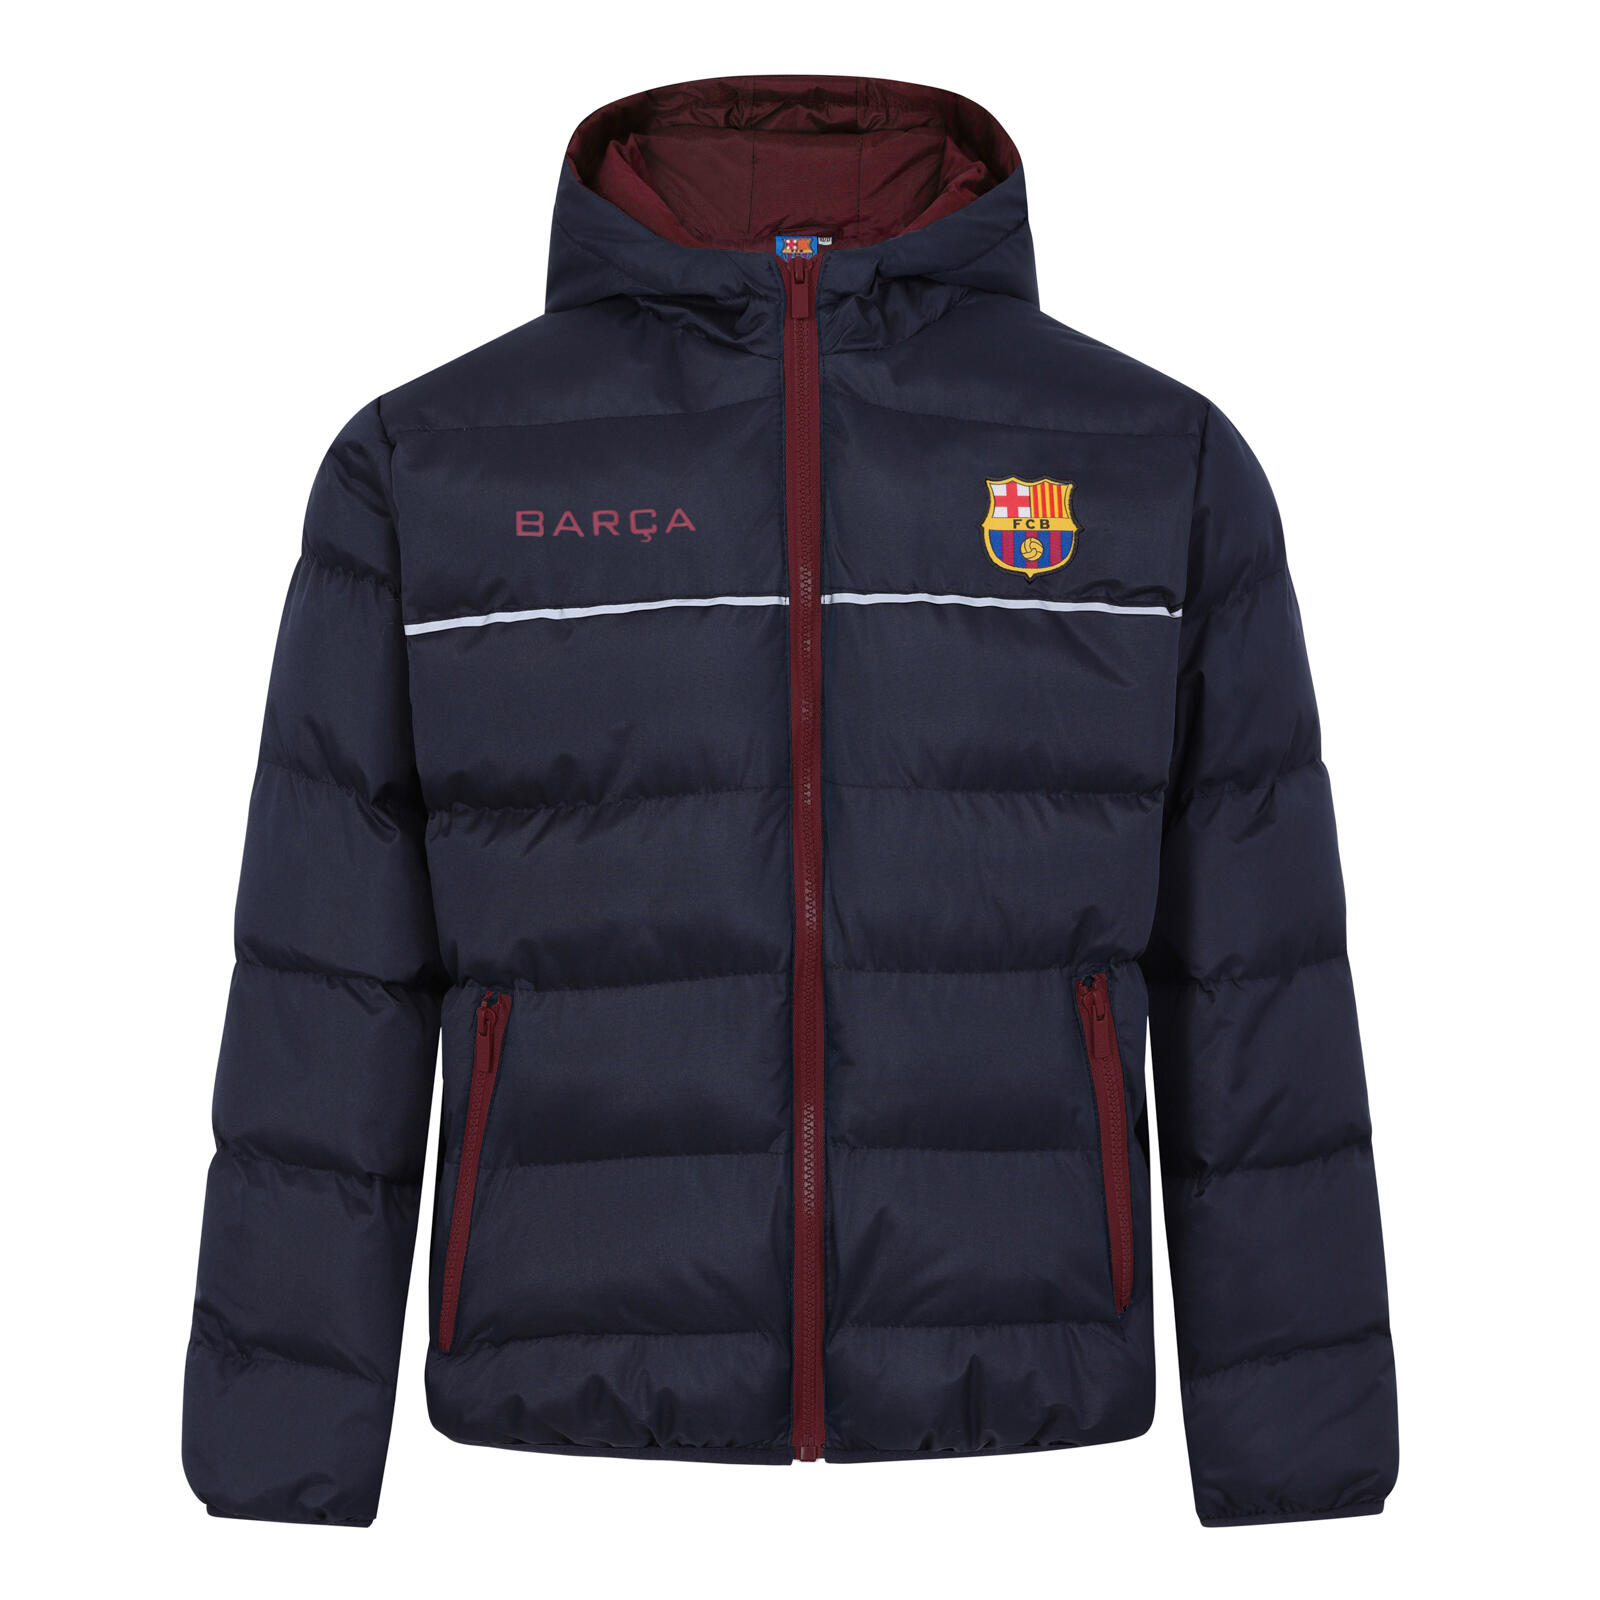 FC BARCELONA FC Barcelona Boys Jacket Hooded Winter Quilted Kids Official Football Gift